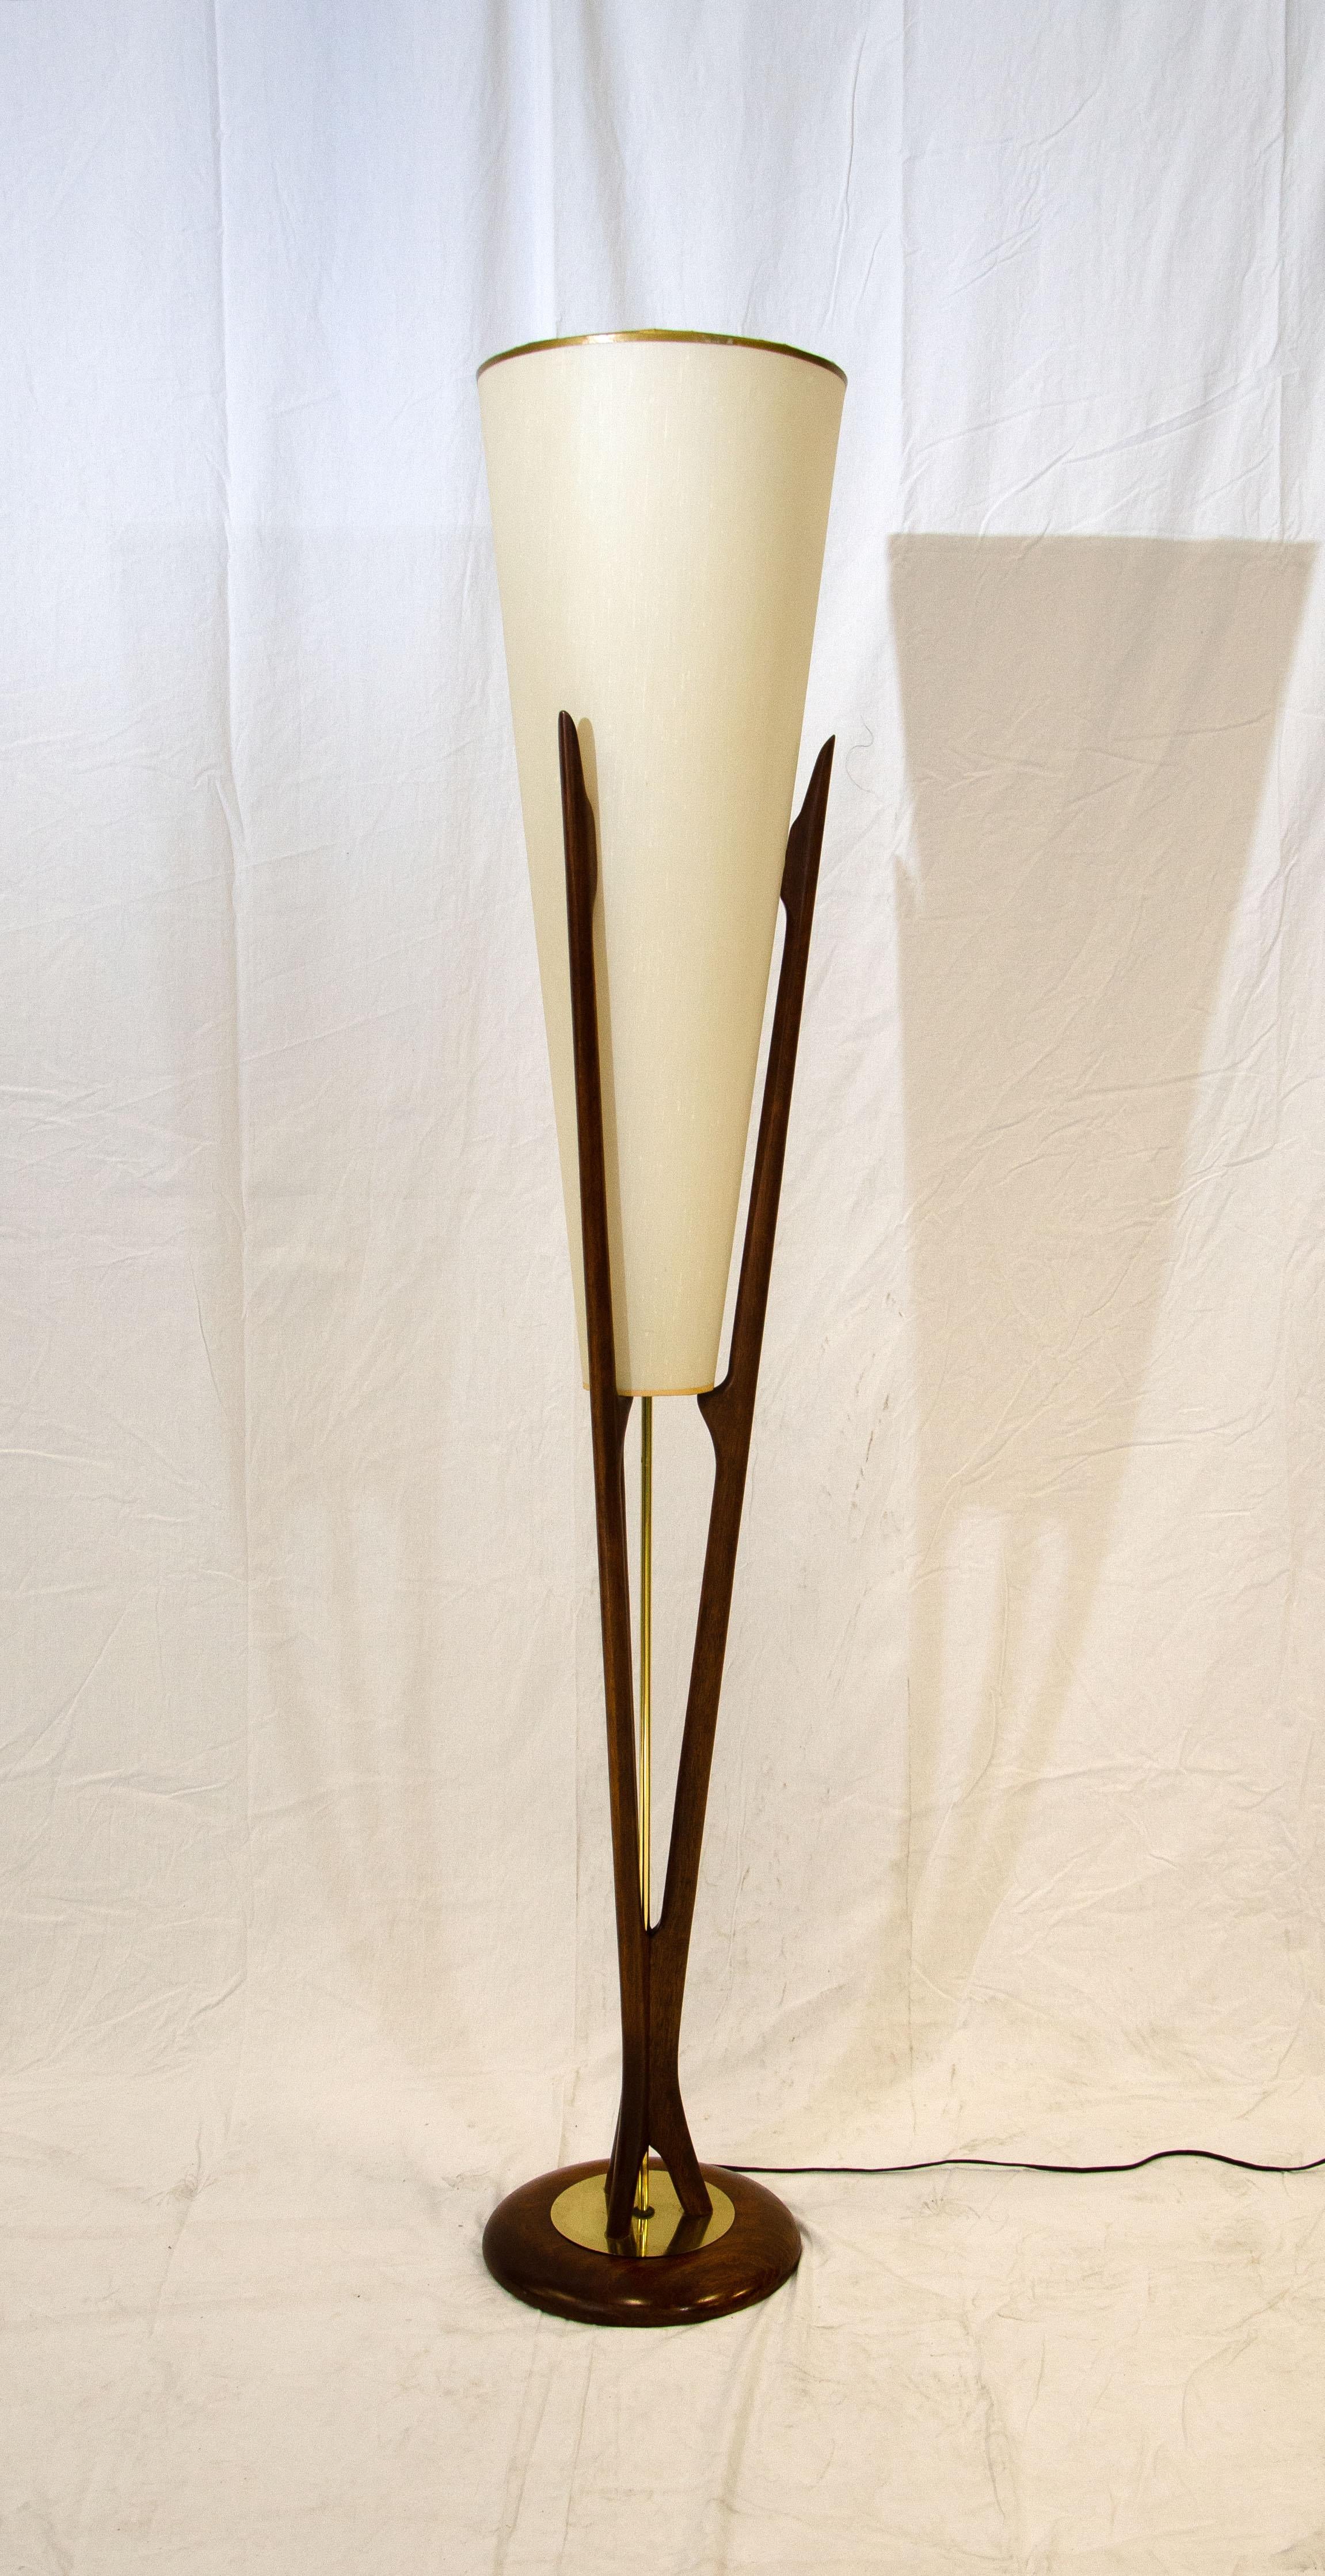 Rare Modeline floor lamp with sculpted walnut frame and original large conical shade which has a textured look. The large shade measures 31 1/2